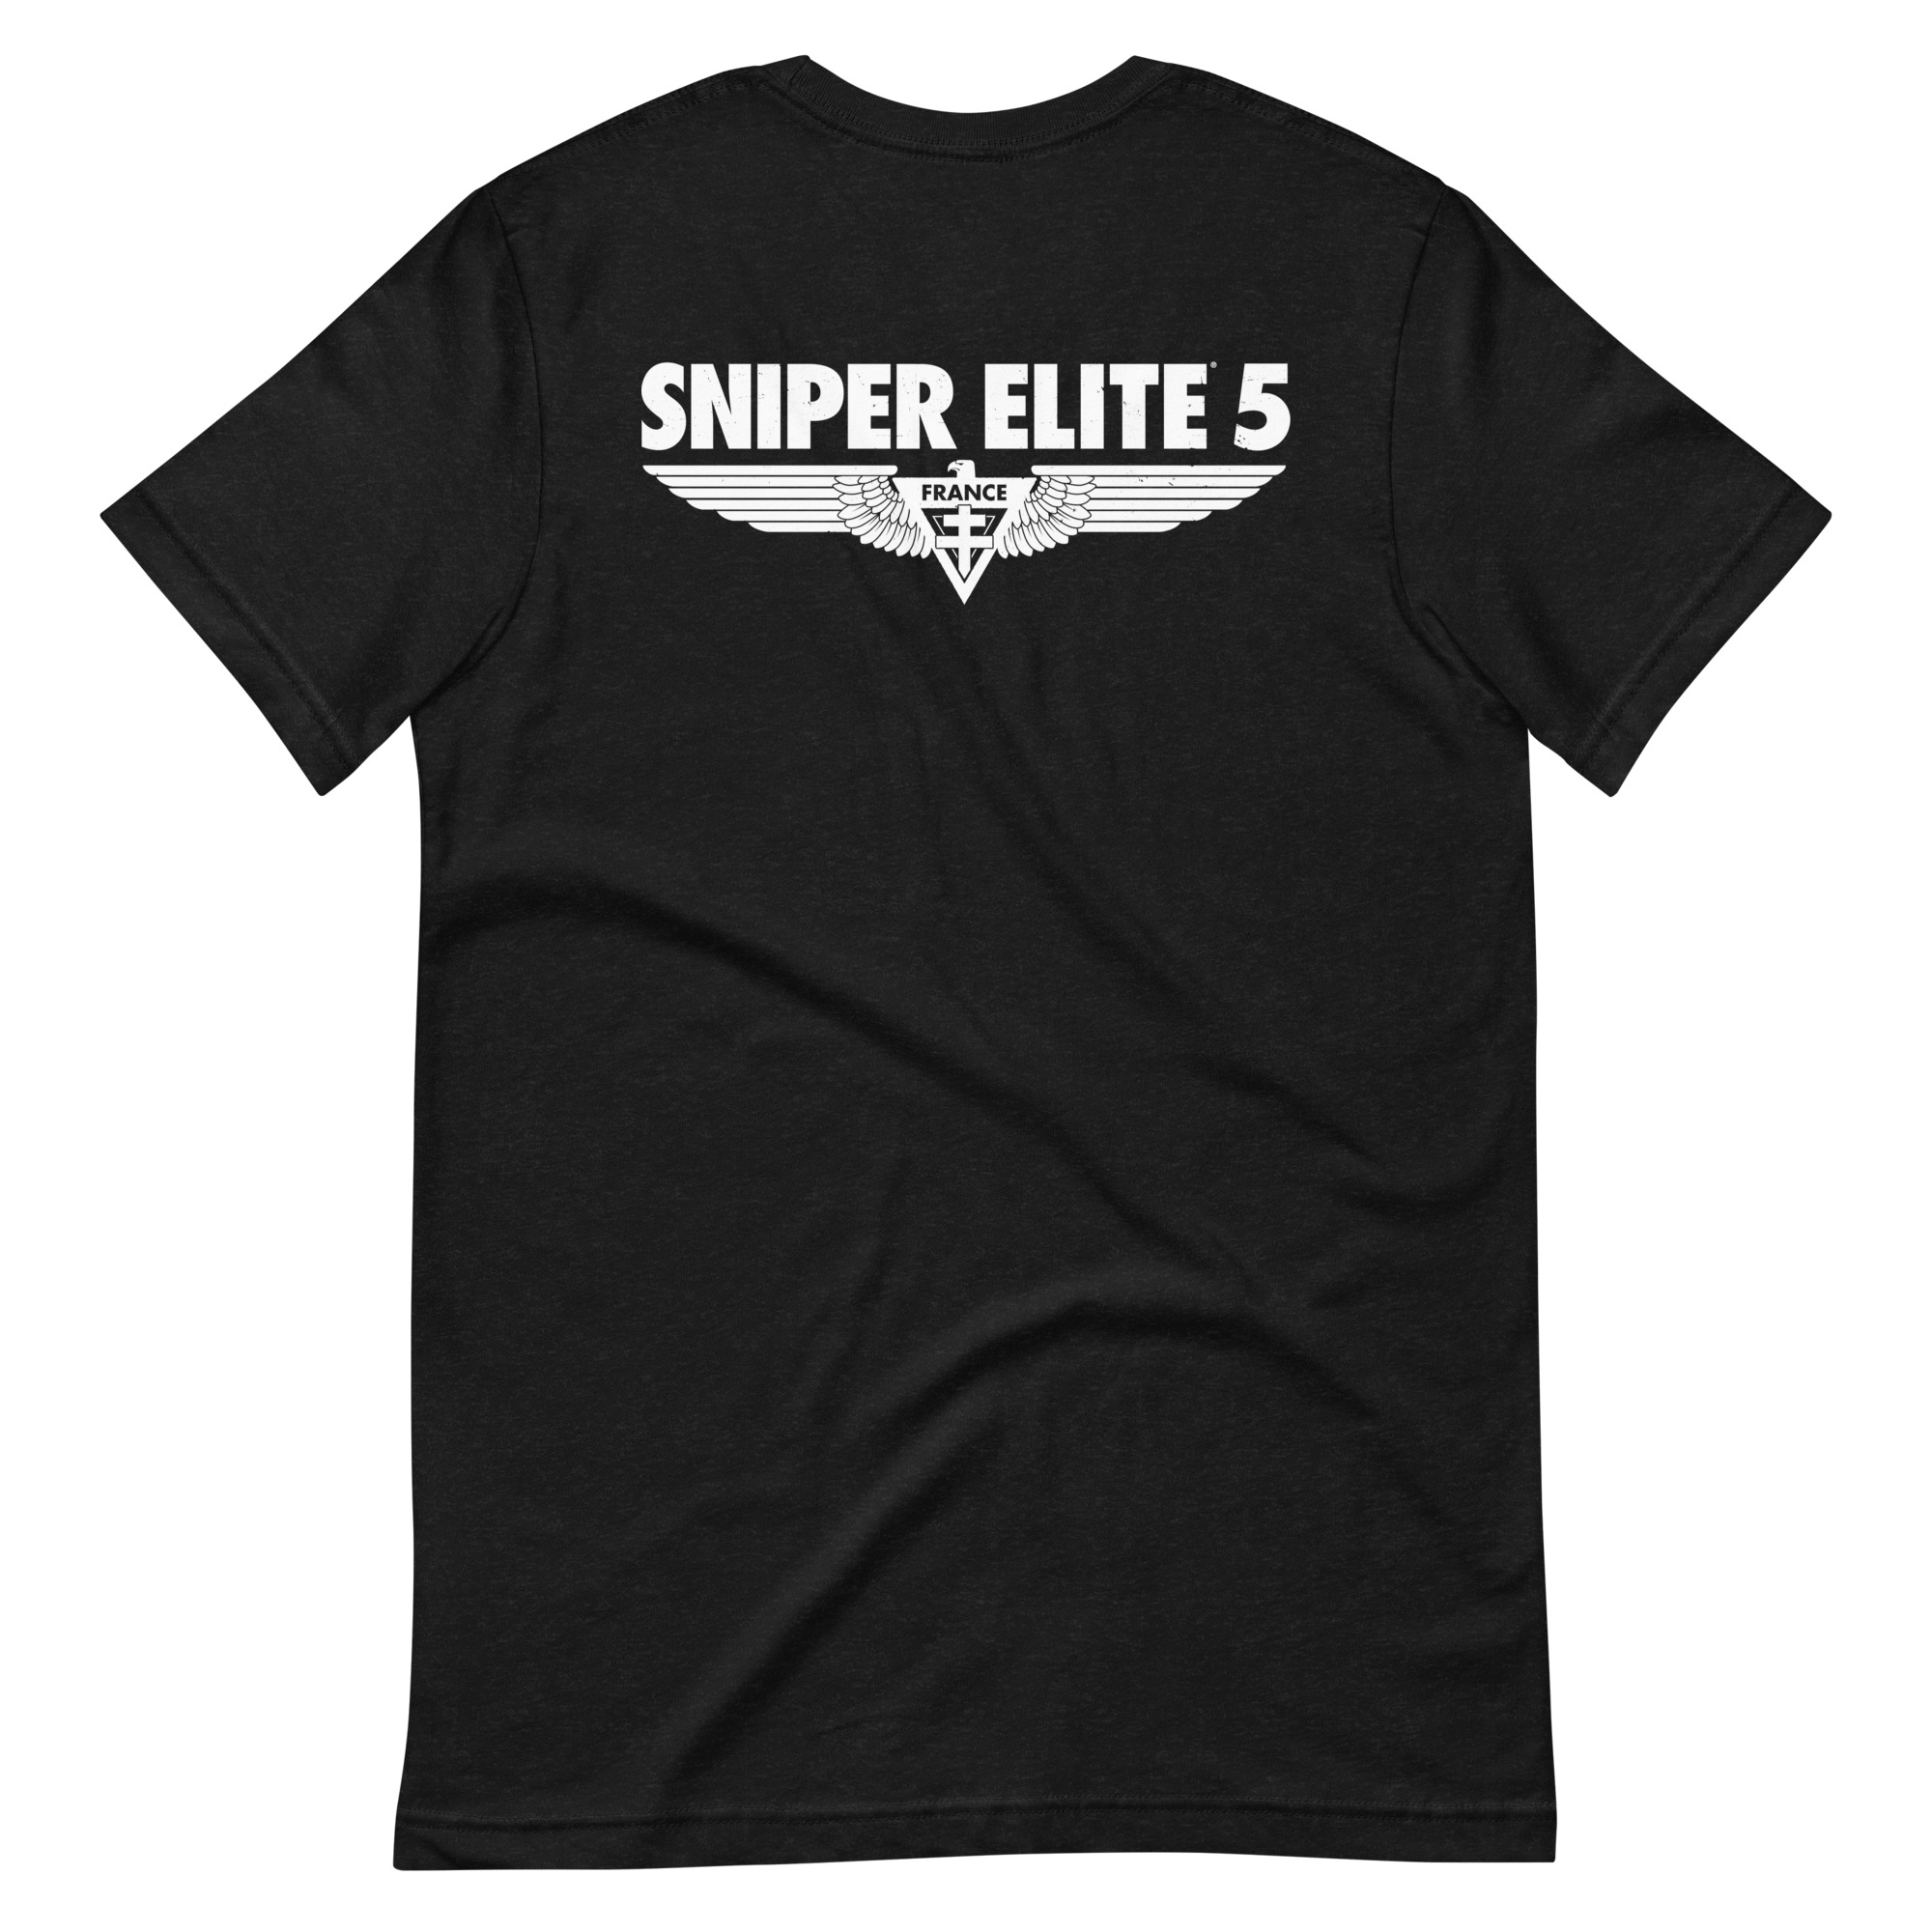 Image of a brown coloured Sniper Elite 5 t-shirt featuring a large Sniper elite 5 logo in the middle